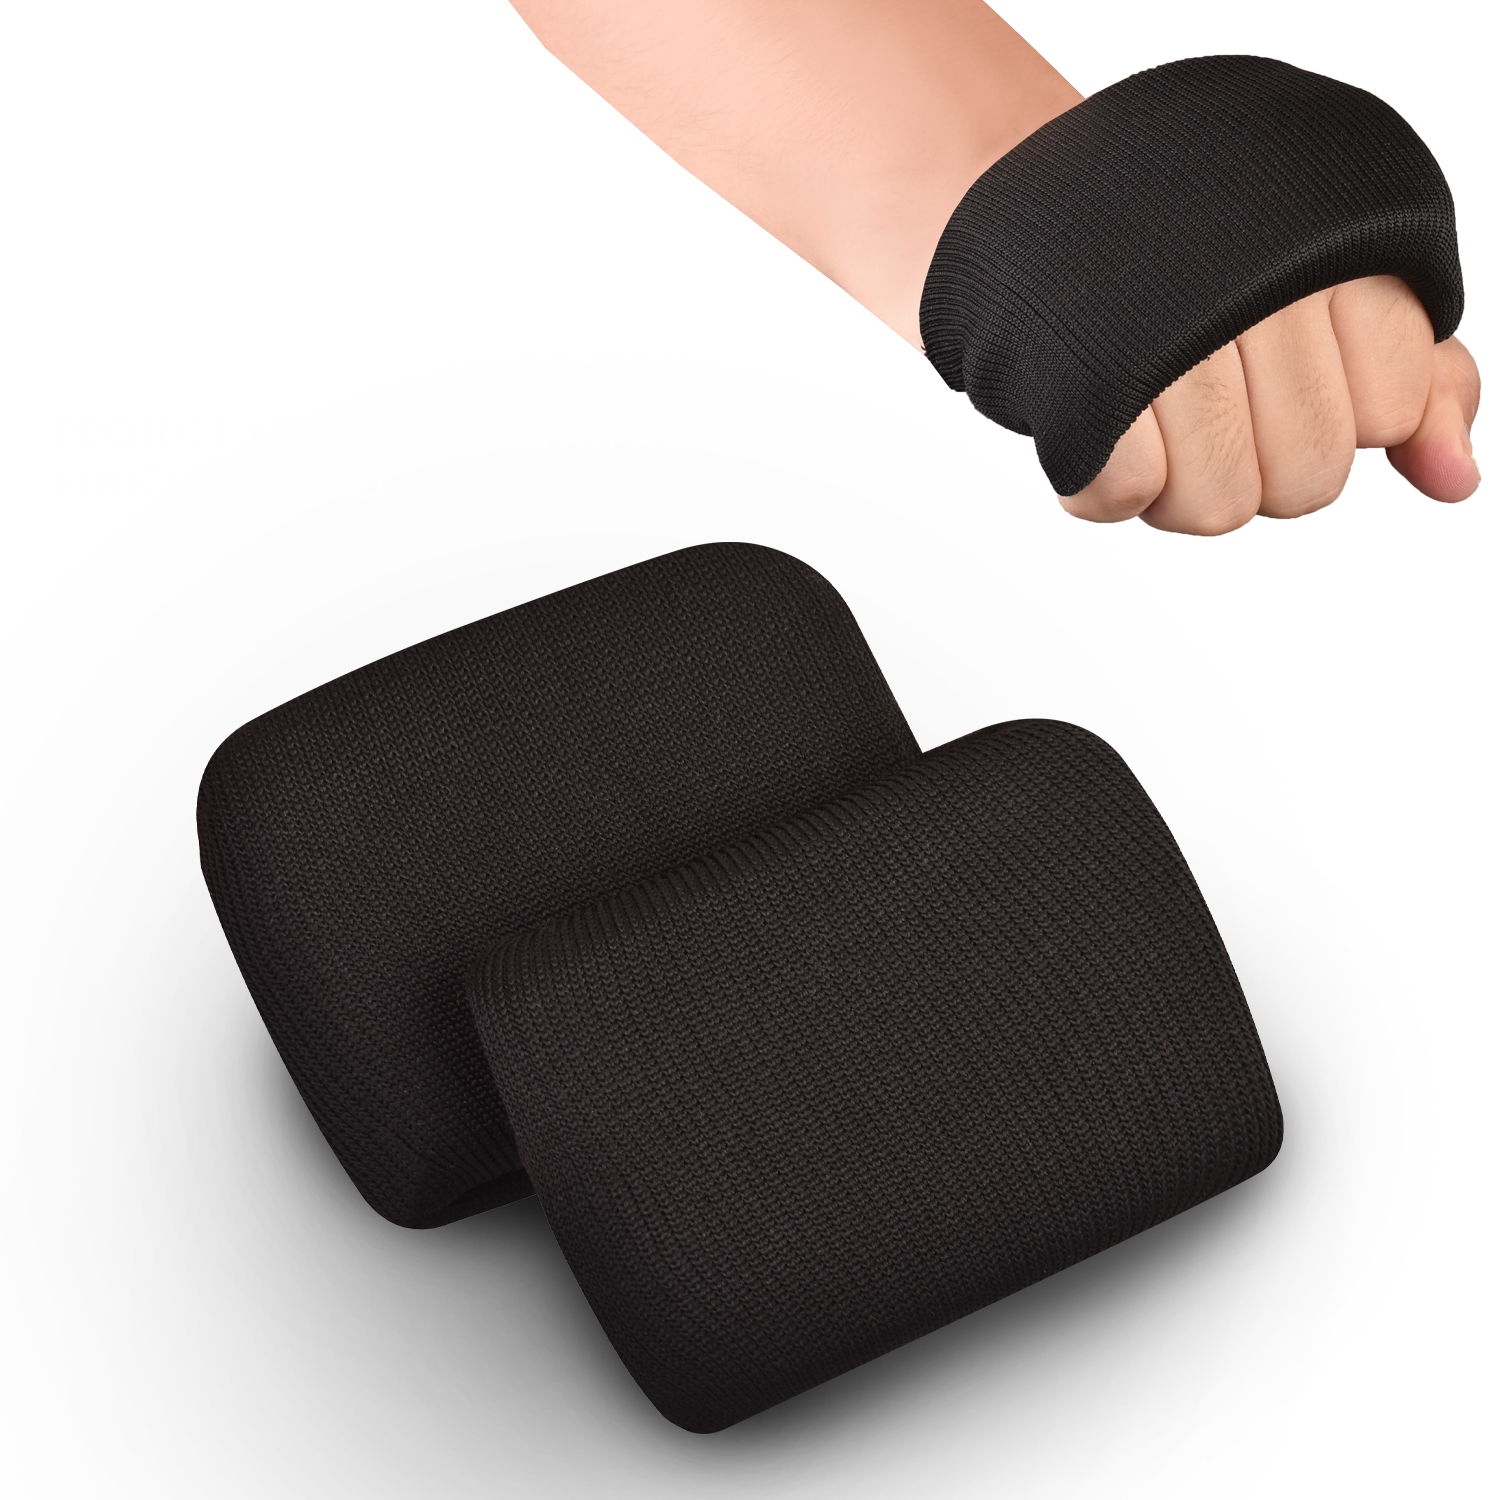 Boxing Knuckle Guard with Hand Wraps - WYOX SPORTS